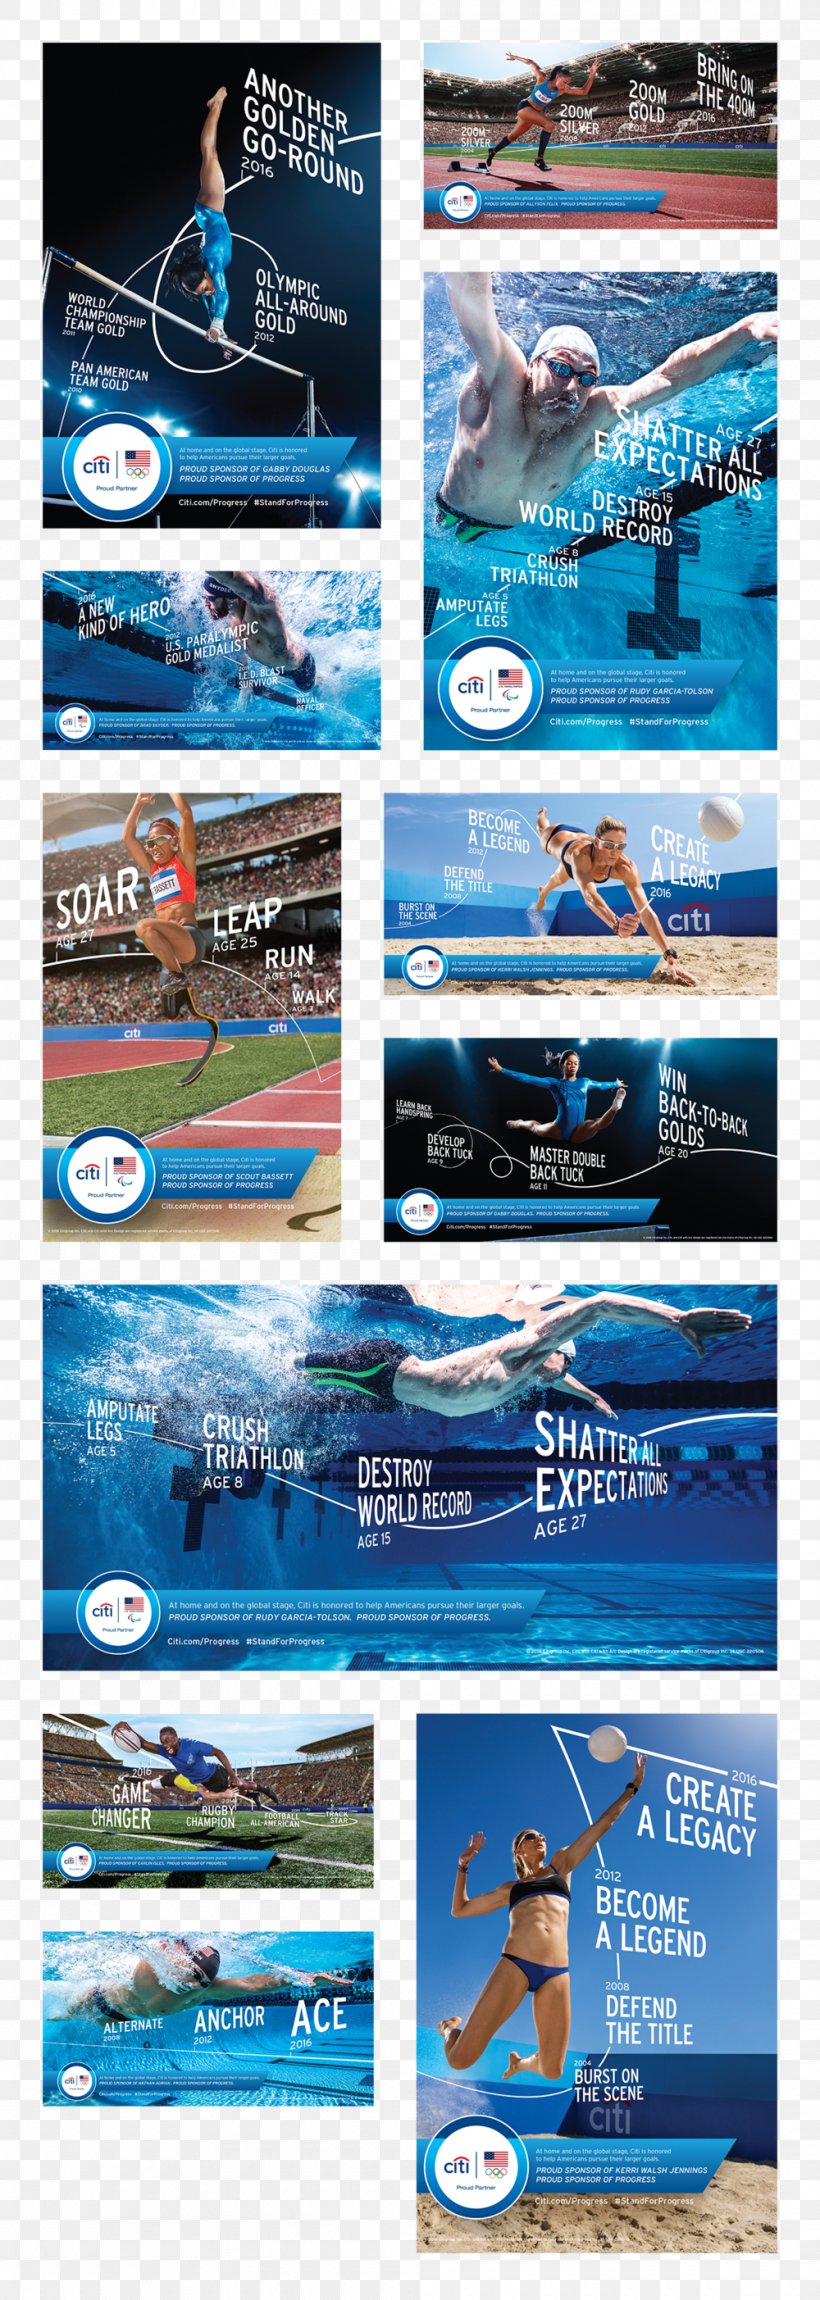 Business Citibank Sport Athlete Brand, PNG, 1000x2806px, Business, Advertising, Athlete, Bank, Brand Download Free